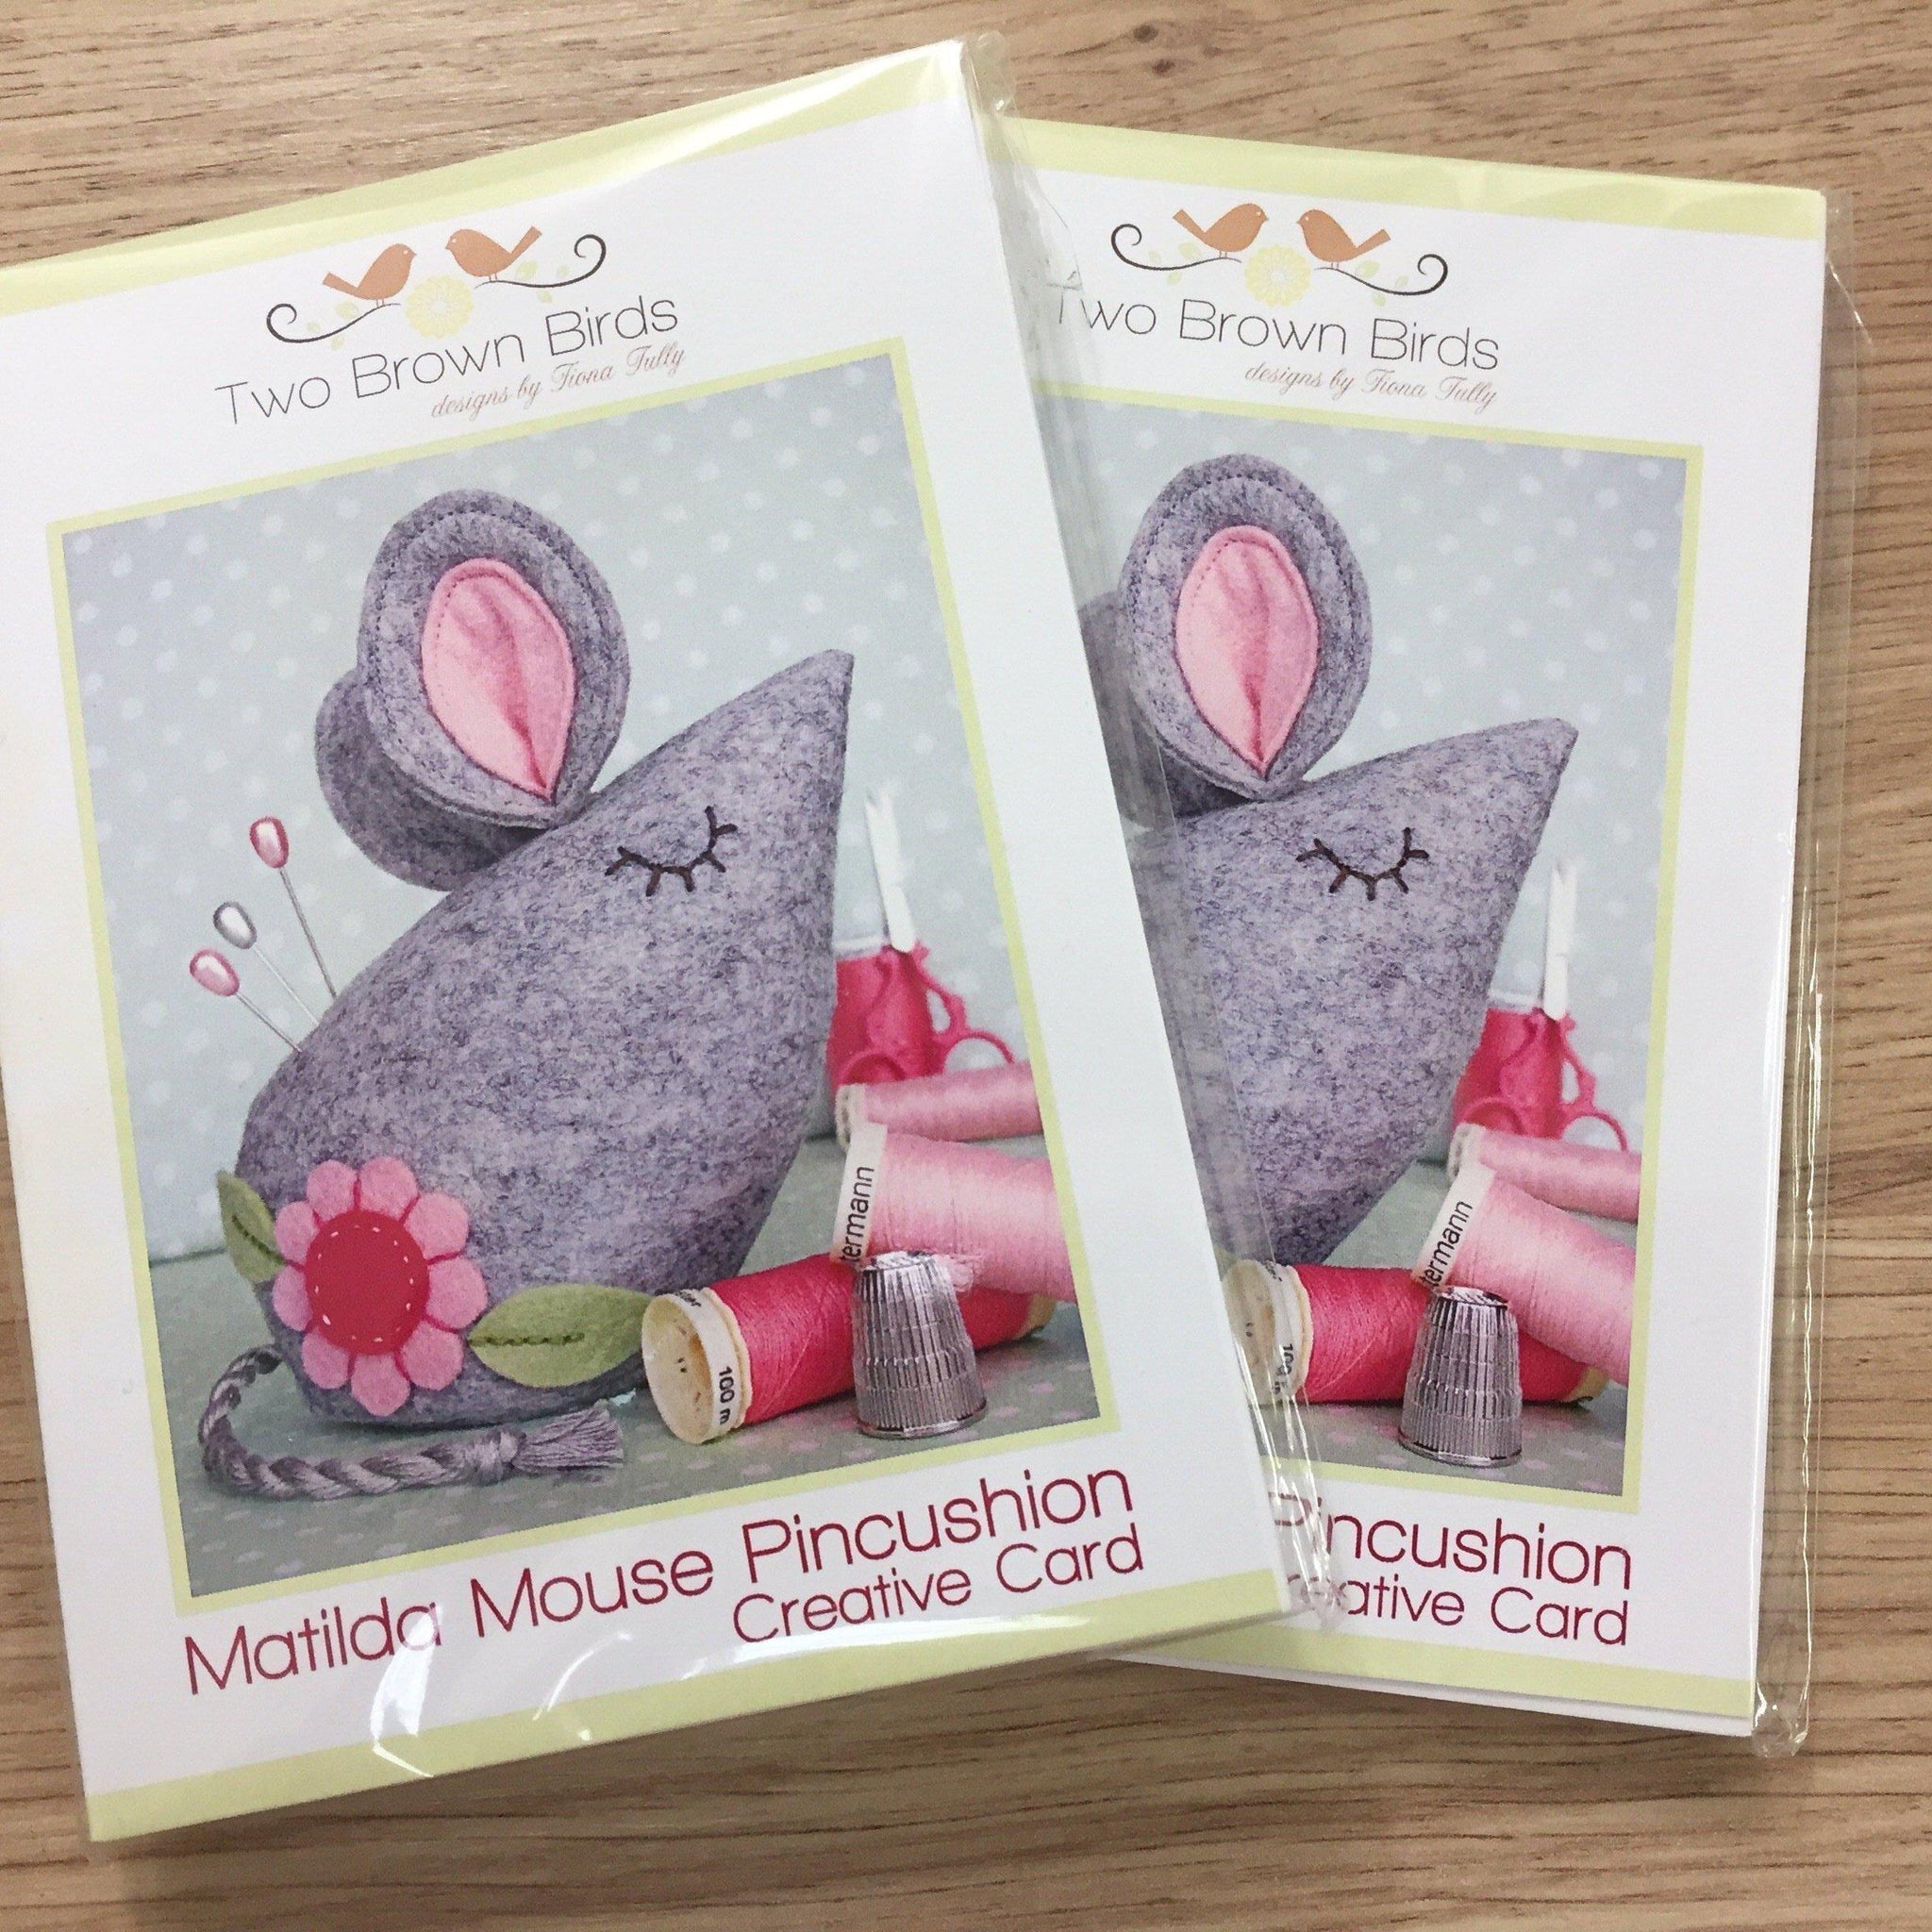 Matilda mouse pincushion creative card-Sewing Pattern-Fabric Mouse-Fabric Mouse